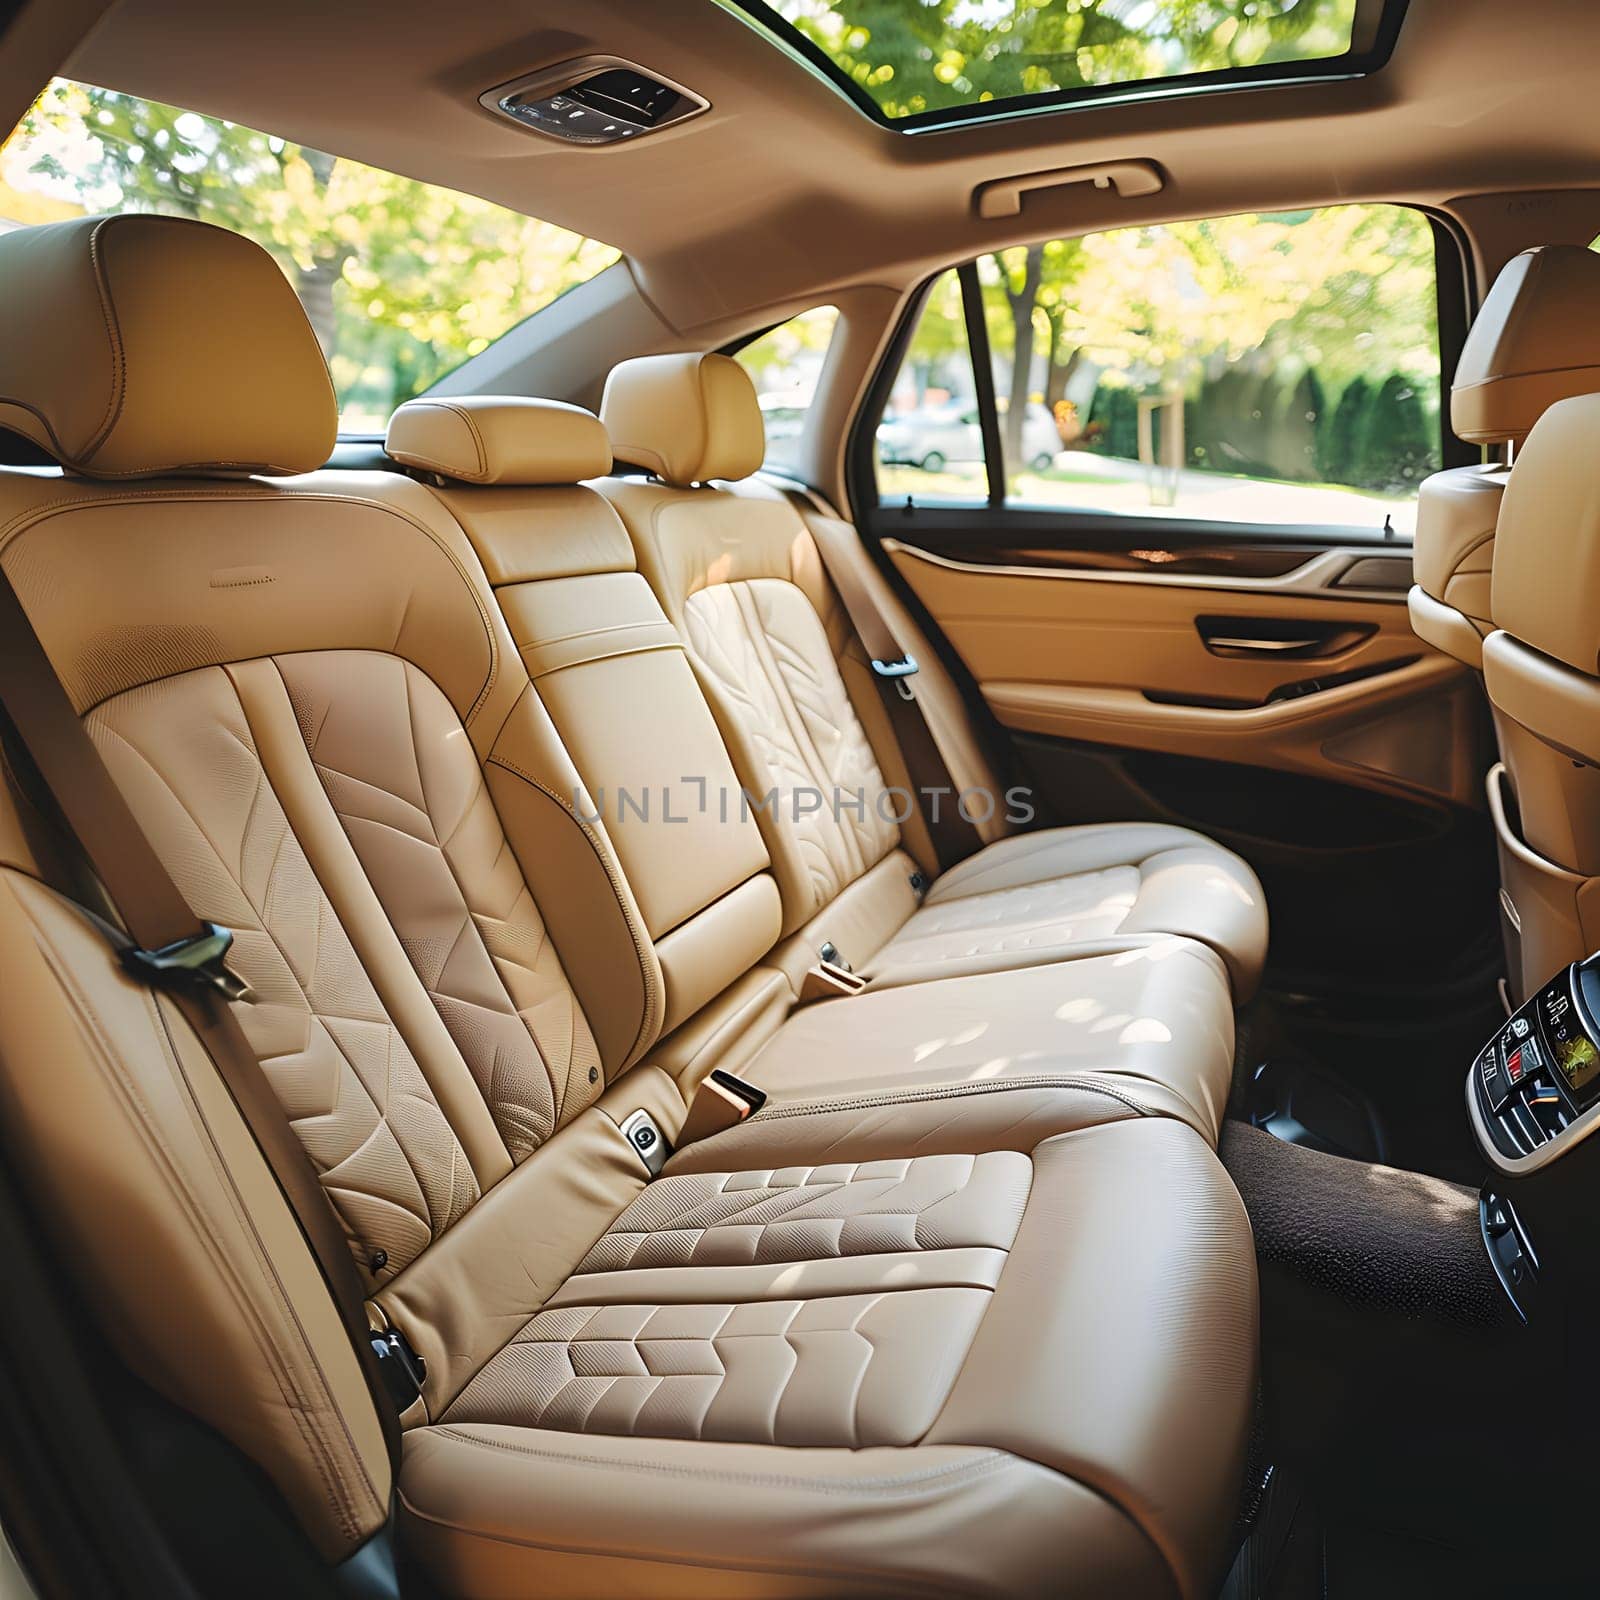 Ride in style in a luxurious vehicle with tan leather seats in the back. Enjoy the comfort and elegance of the personal luxury car interior